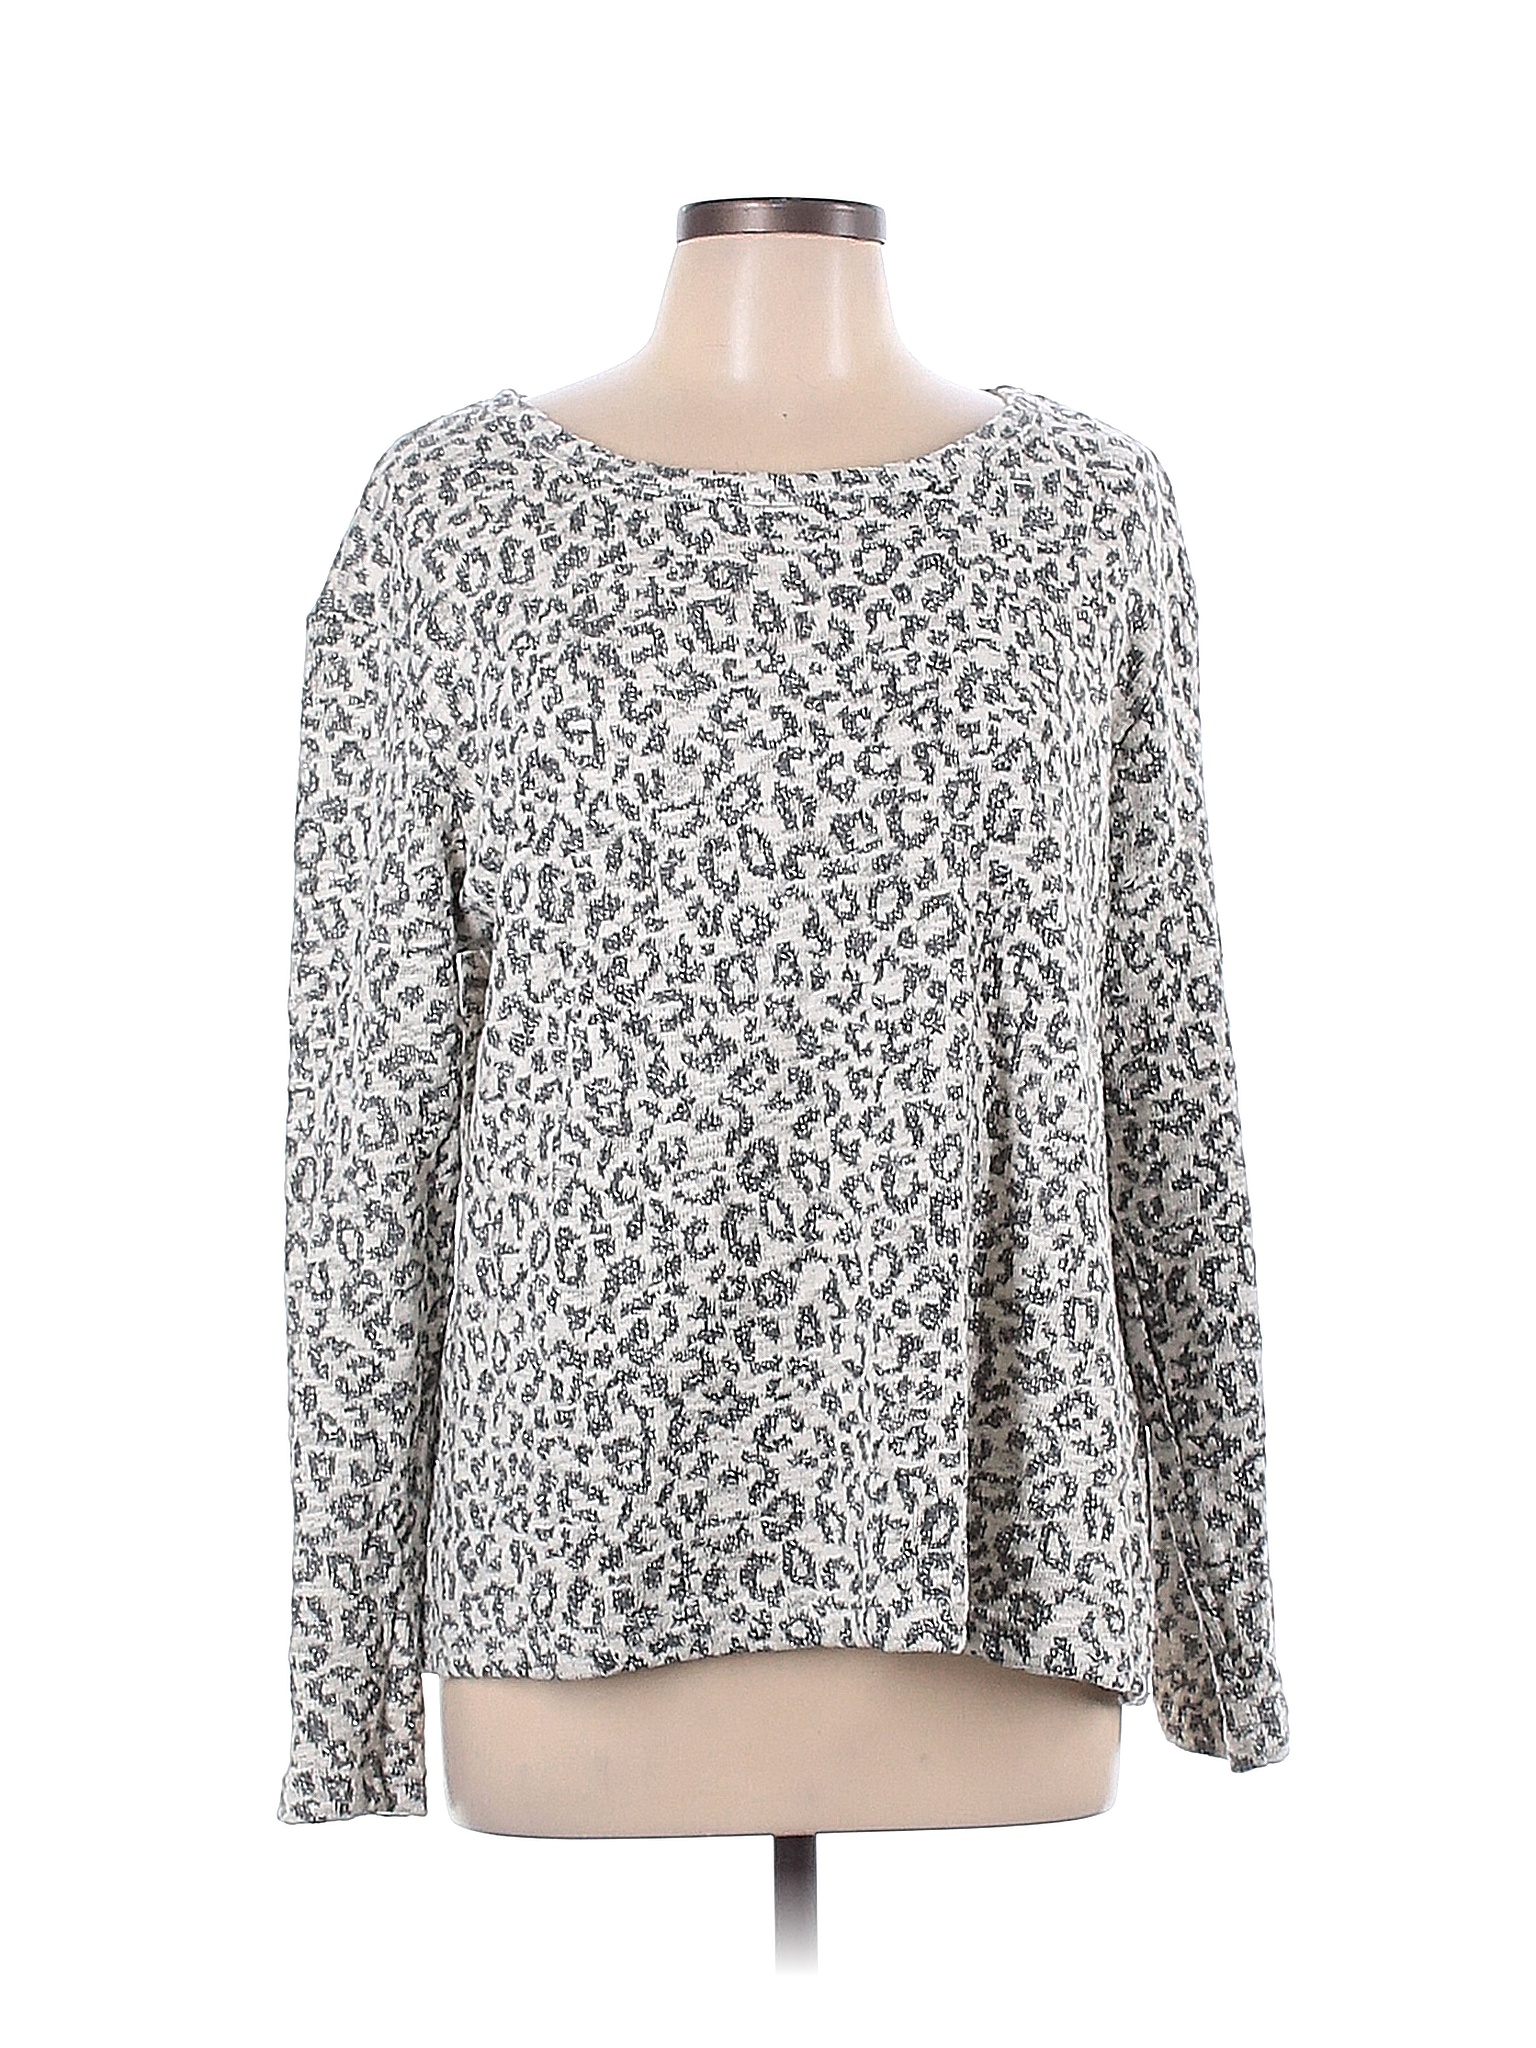 Jane and Delancey Ivory Long Sleeve Top Size XL - 75% off | thredUP